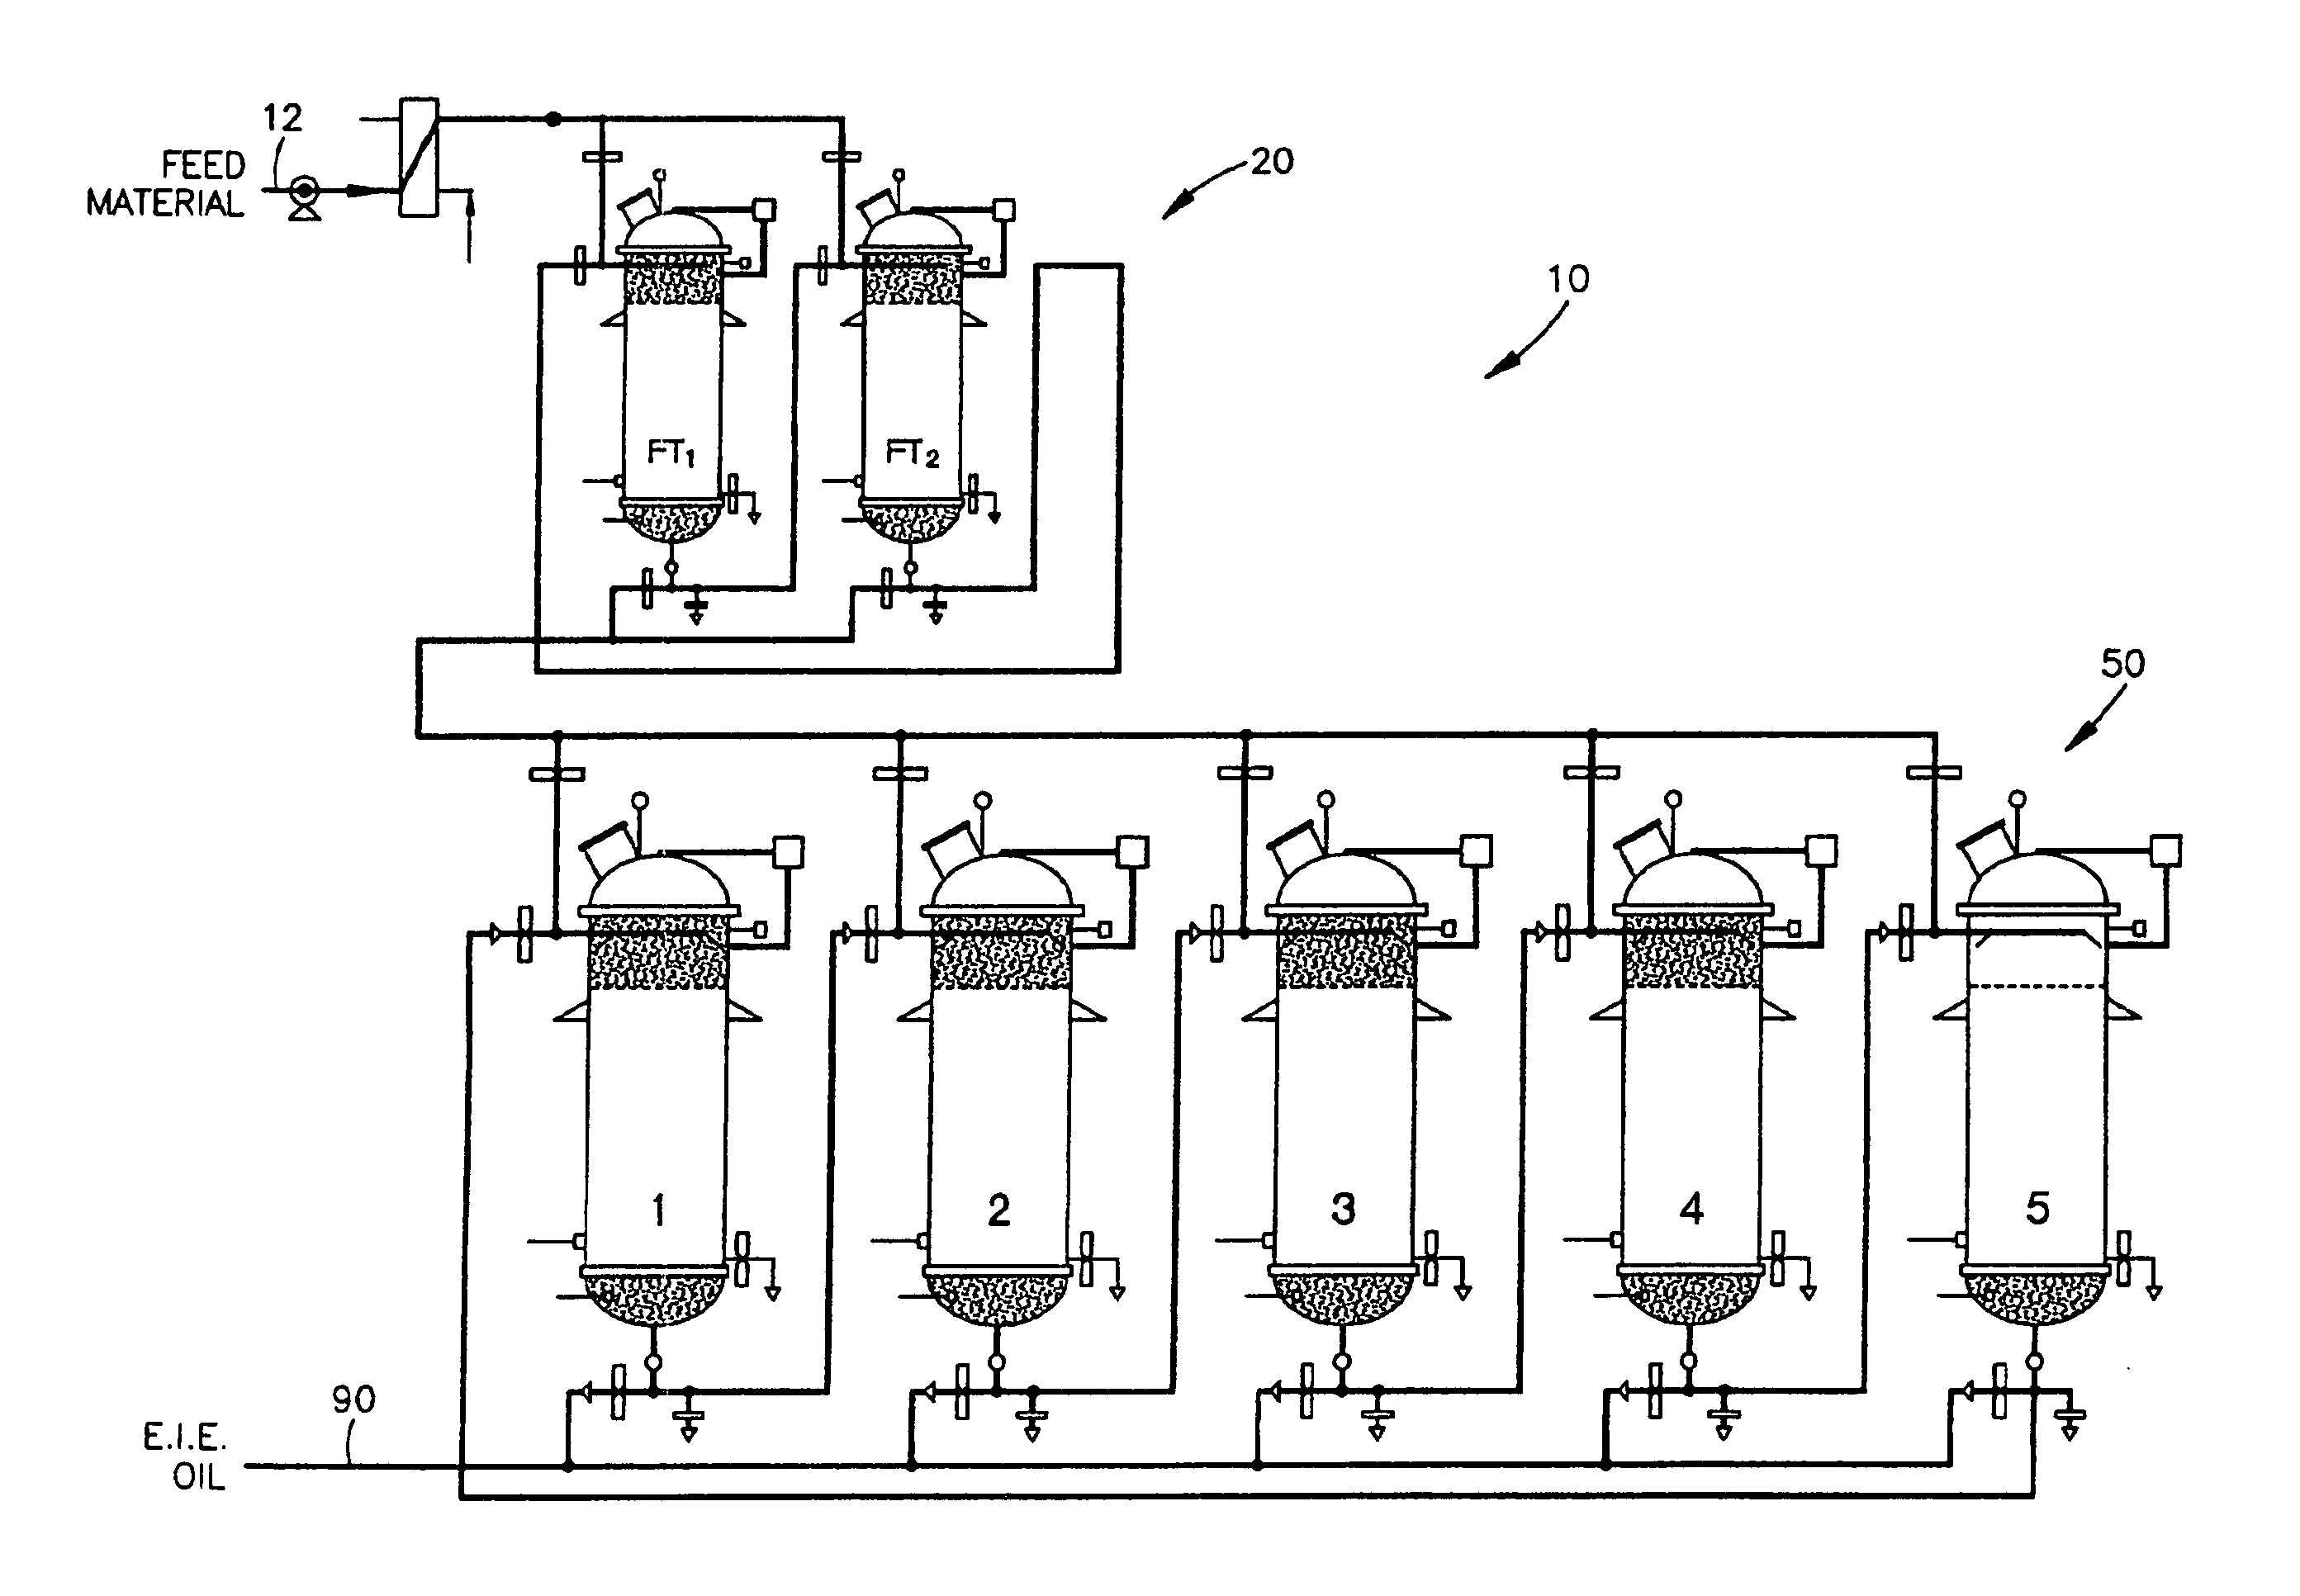 Continuous Process and Apparatus for Enzymatic Treatment of Lipids